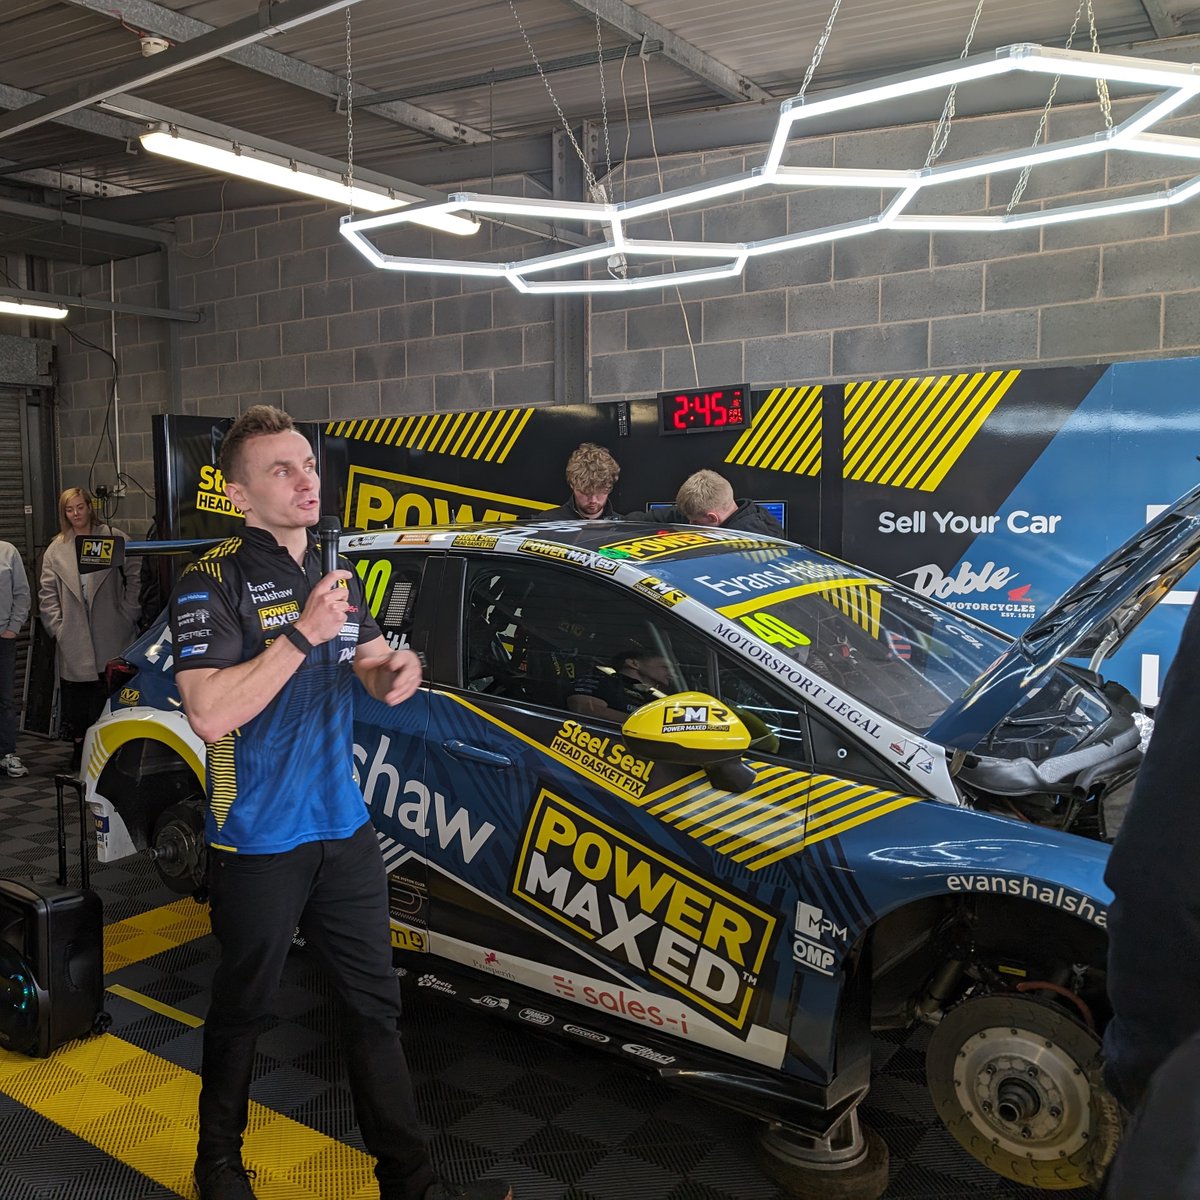 Wishing @AaronTaylorSmith the best of luck on his race this weekend!

 From all of us at Evo3D, sending our full support and positive vibes for a thrilling performance on the track. 

@powermaxedracing

#TeamEvo3D #RacingSpirit